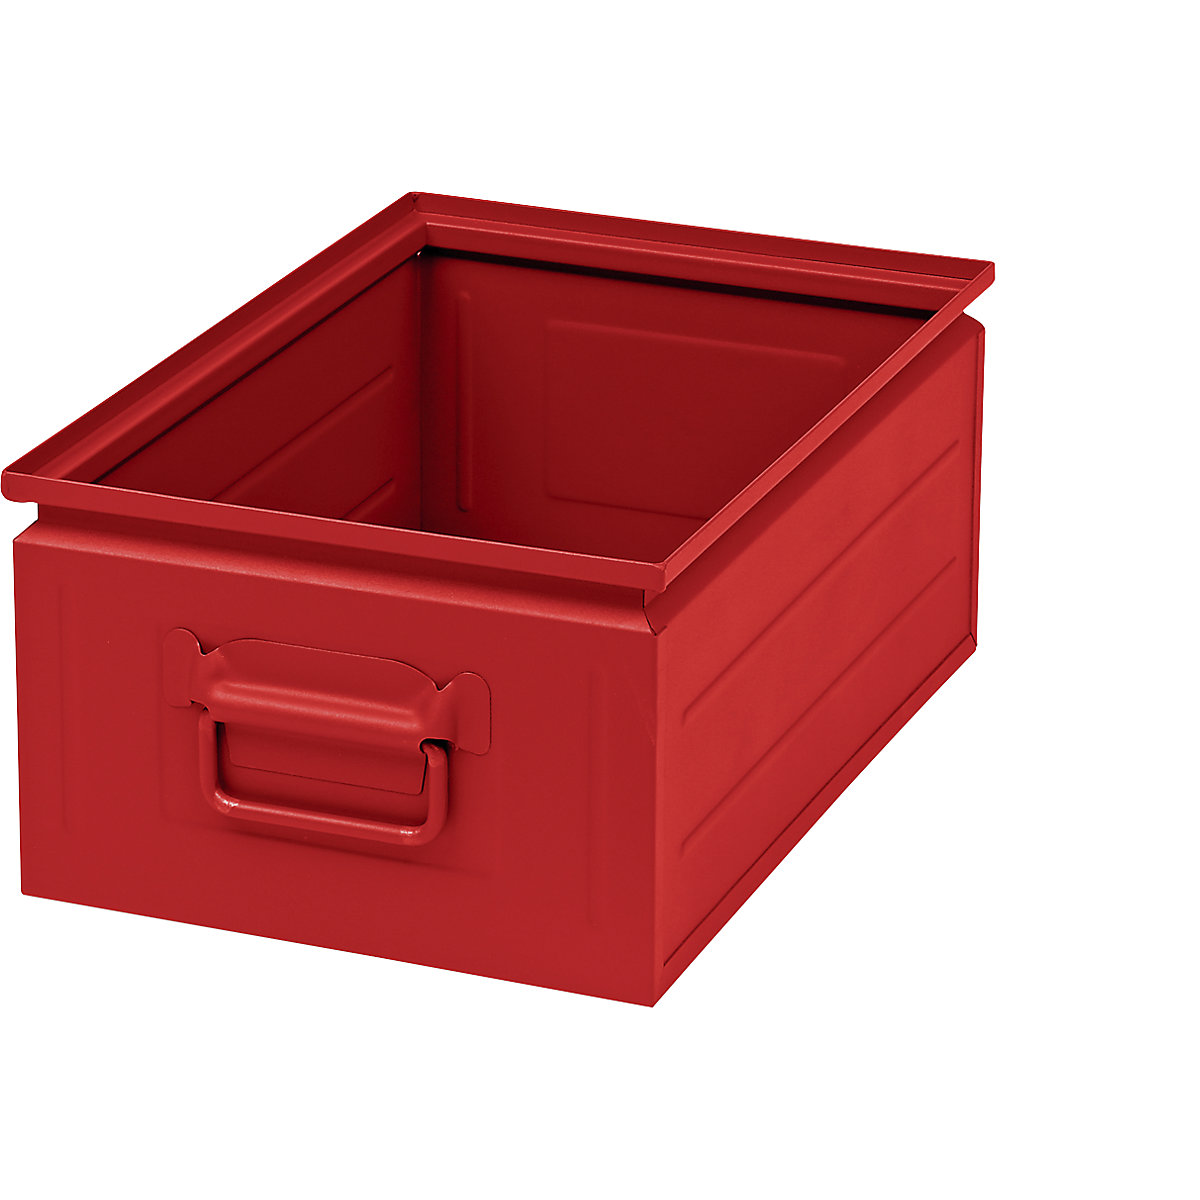 Stacking container made of sheet steel, capacity approx. 25 l, flame red RAL 3000-4